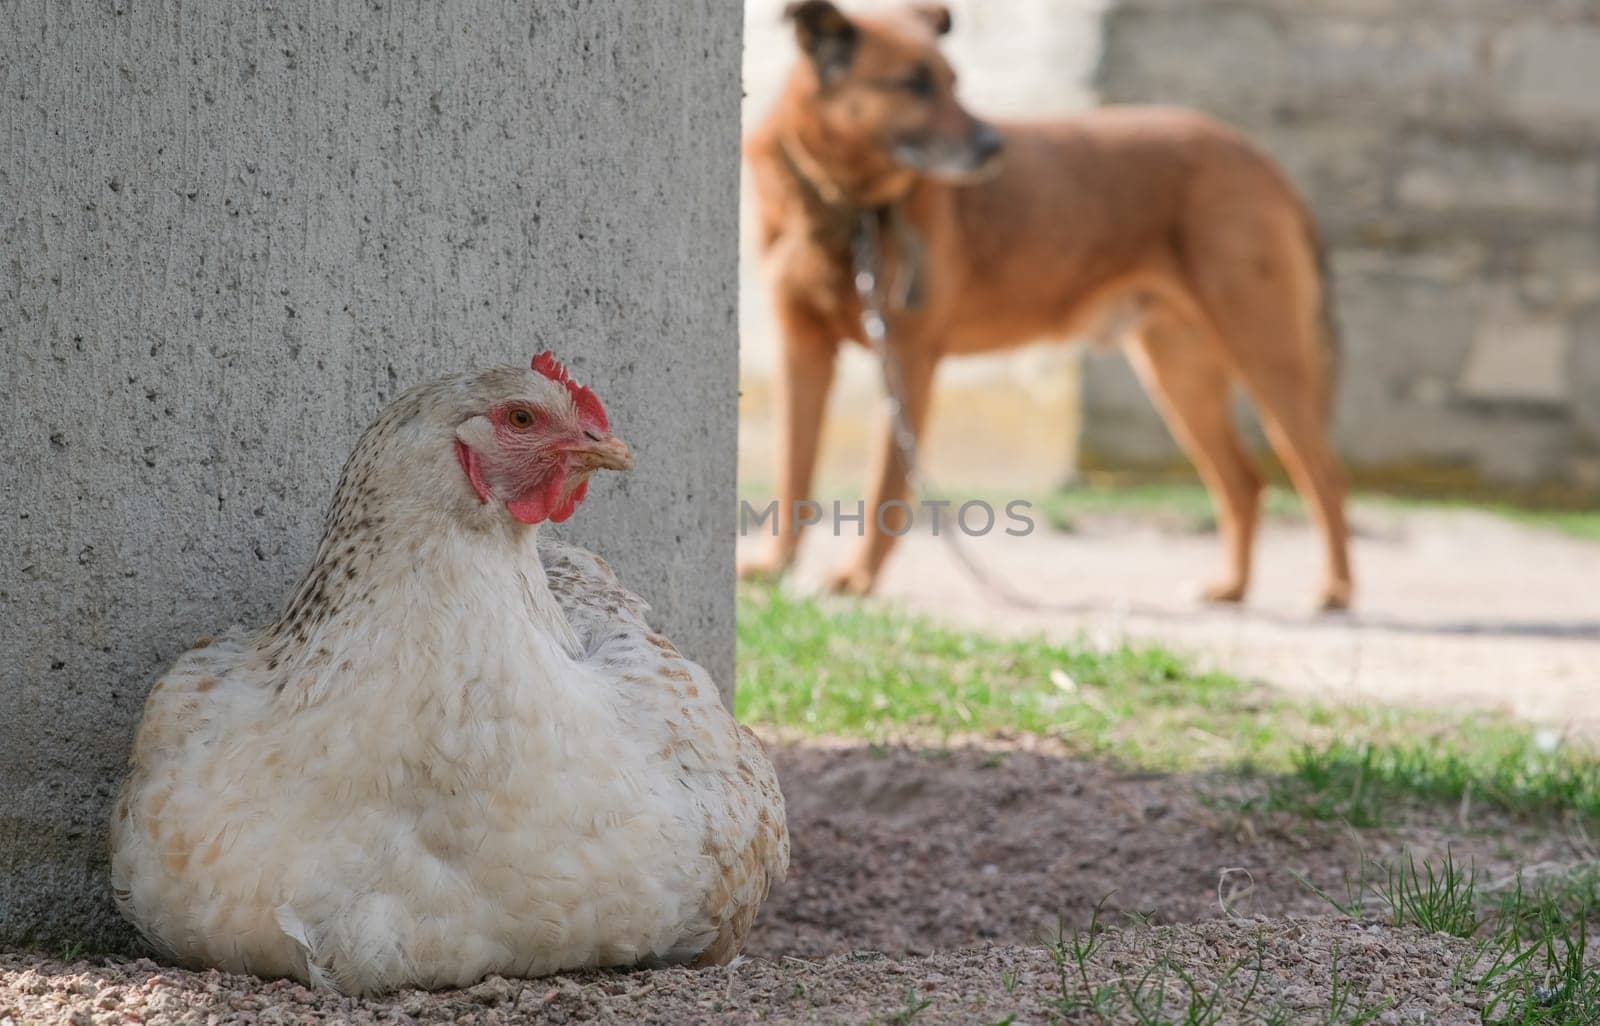 Chicken and dog in one photo. by N_Design